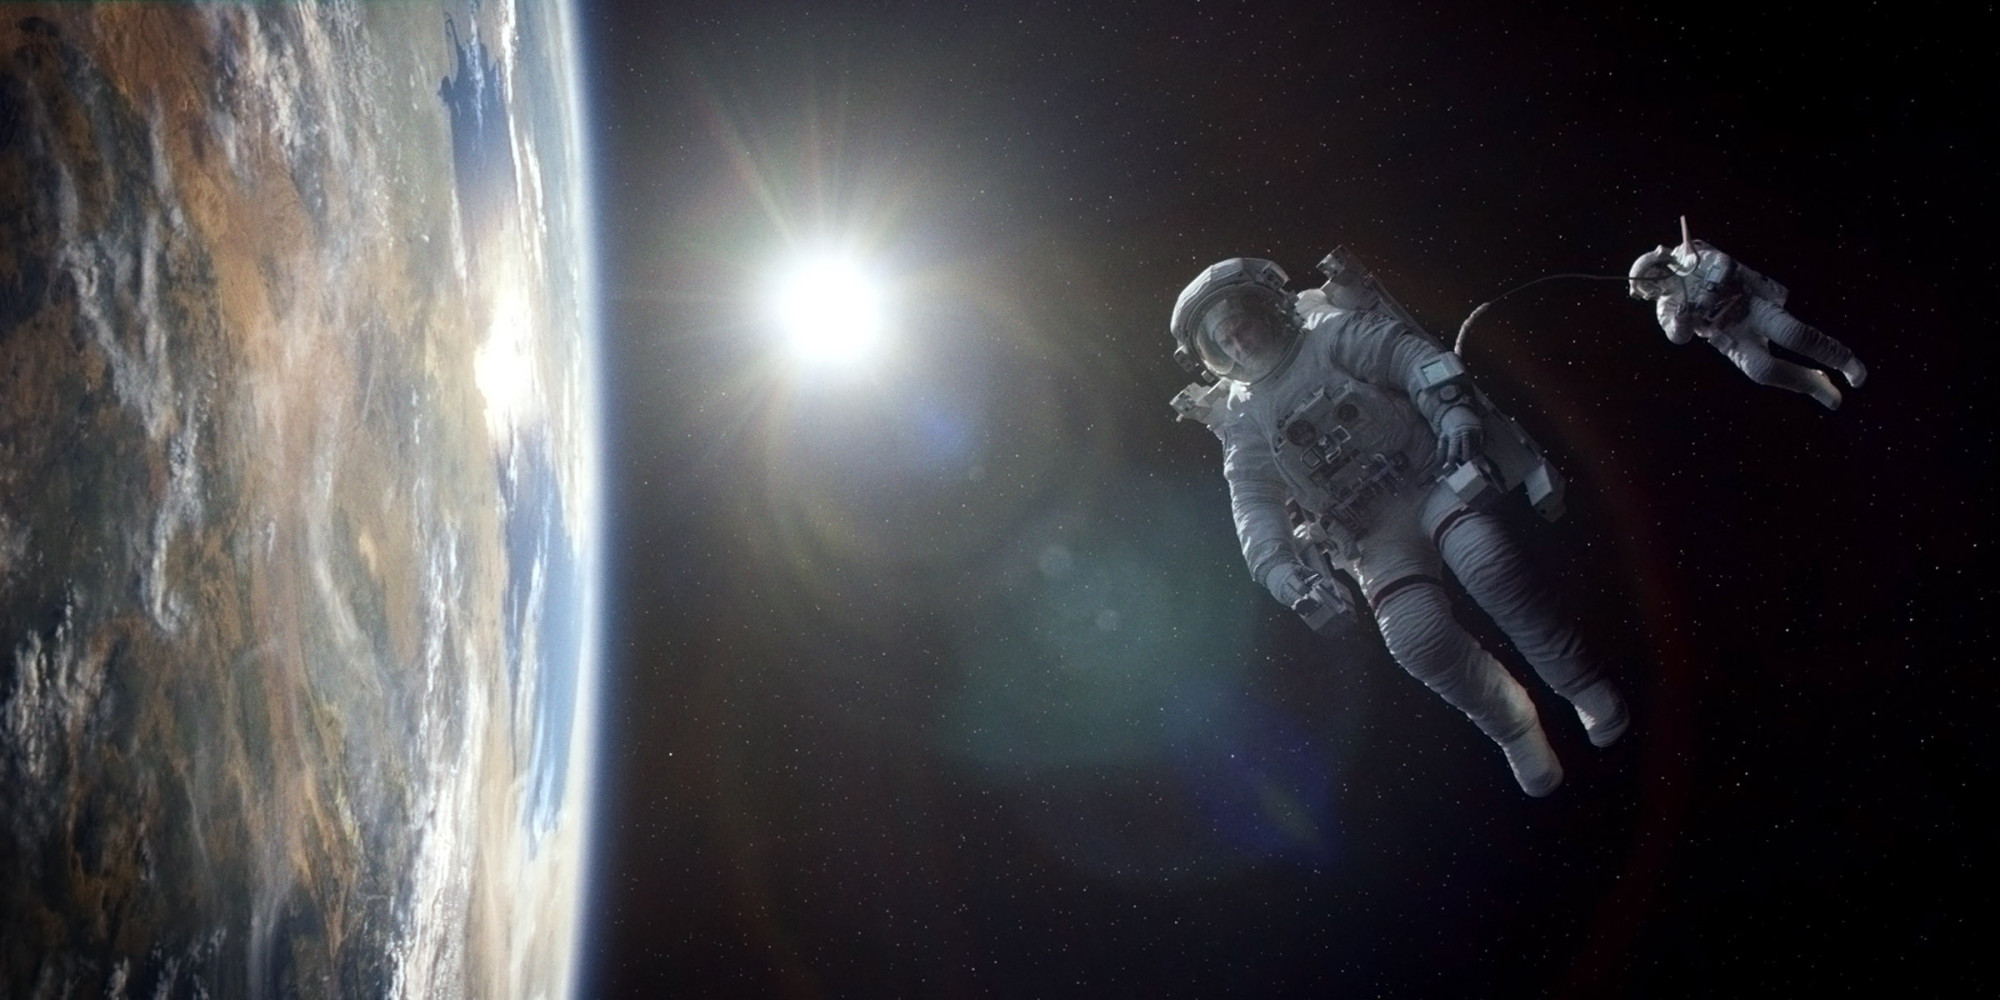 This film image released by Warner Bros. Pictures shows a scene from "Gravity." (AP Photo/Warner Bros. Pictures)